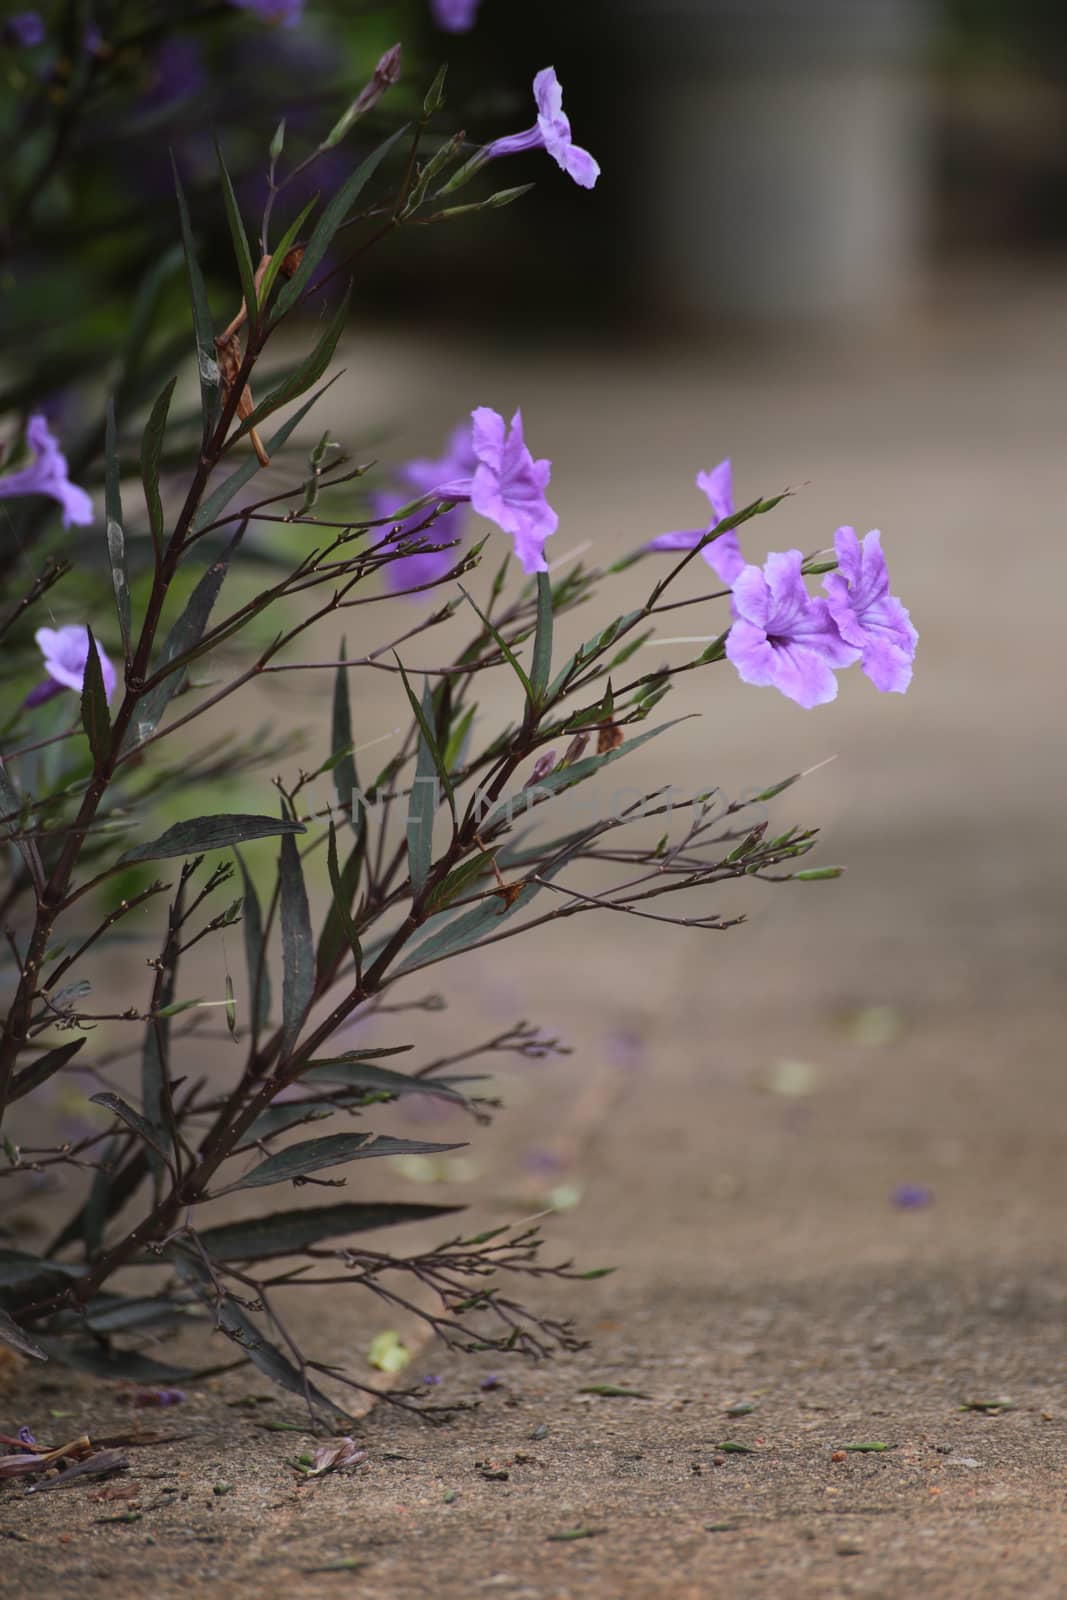 The ruellia tuberose are growing on the footpath.